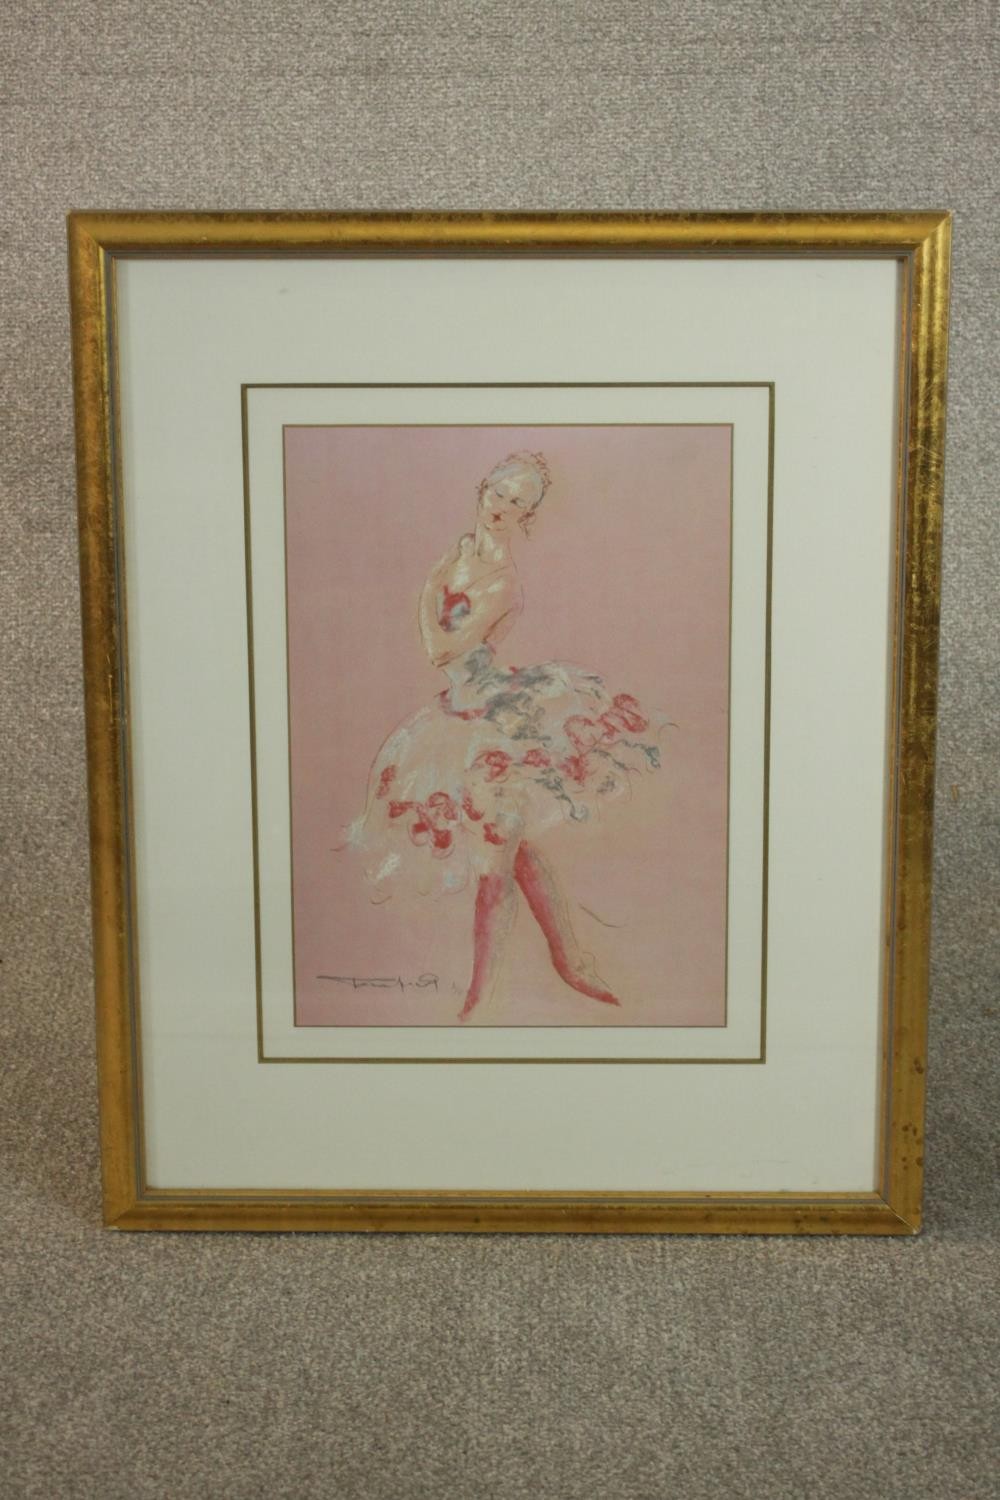 Tom Merrifield, (b.1932), study of a dancer, offset artist's proof lithograph printed in colours - Image 2 of 6